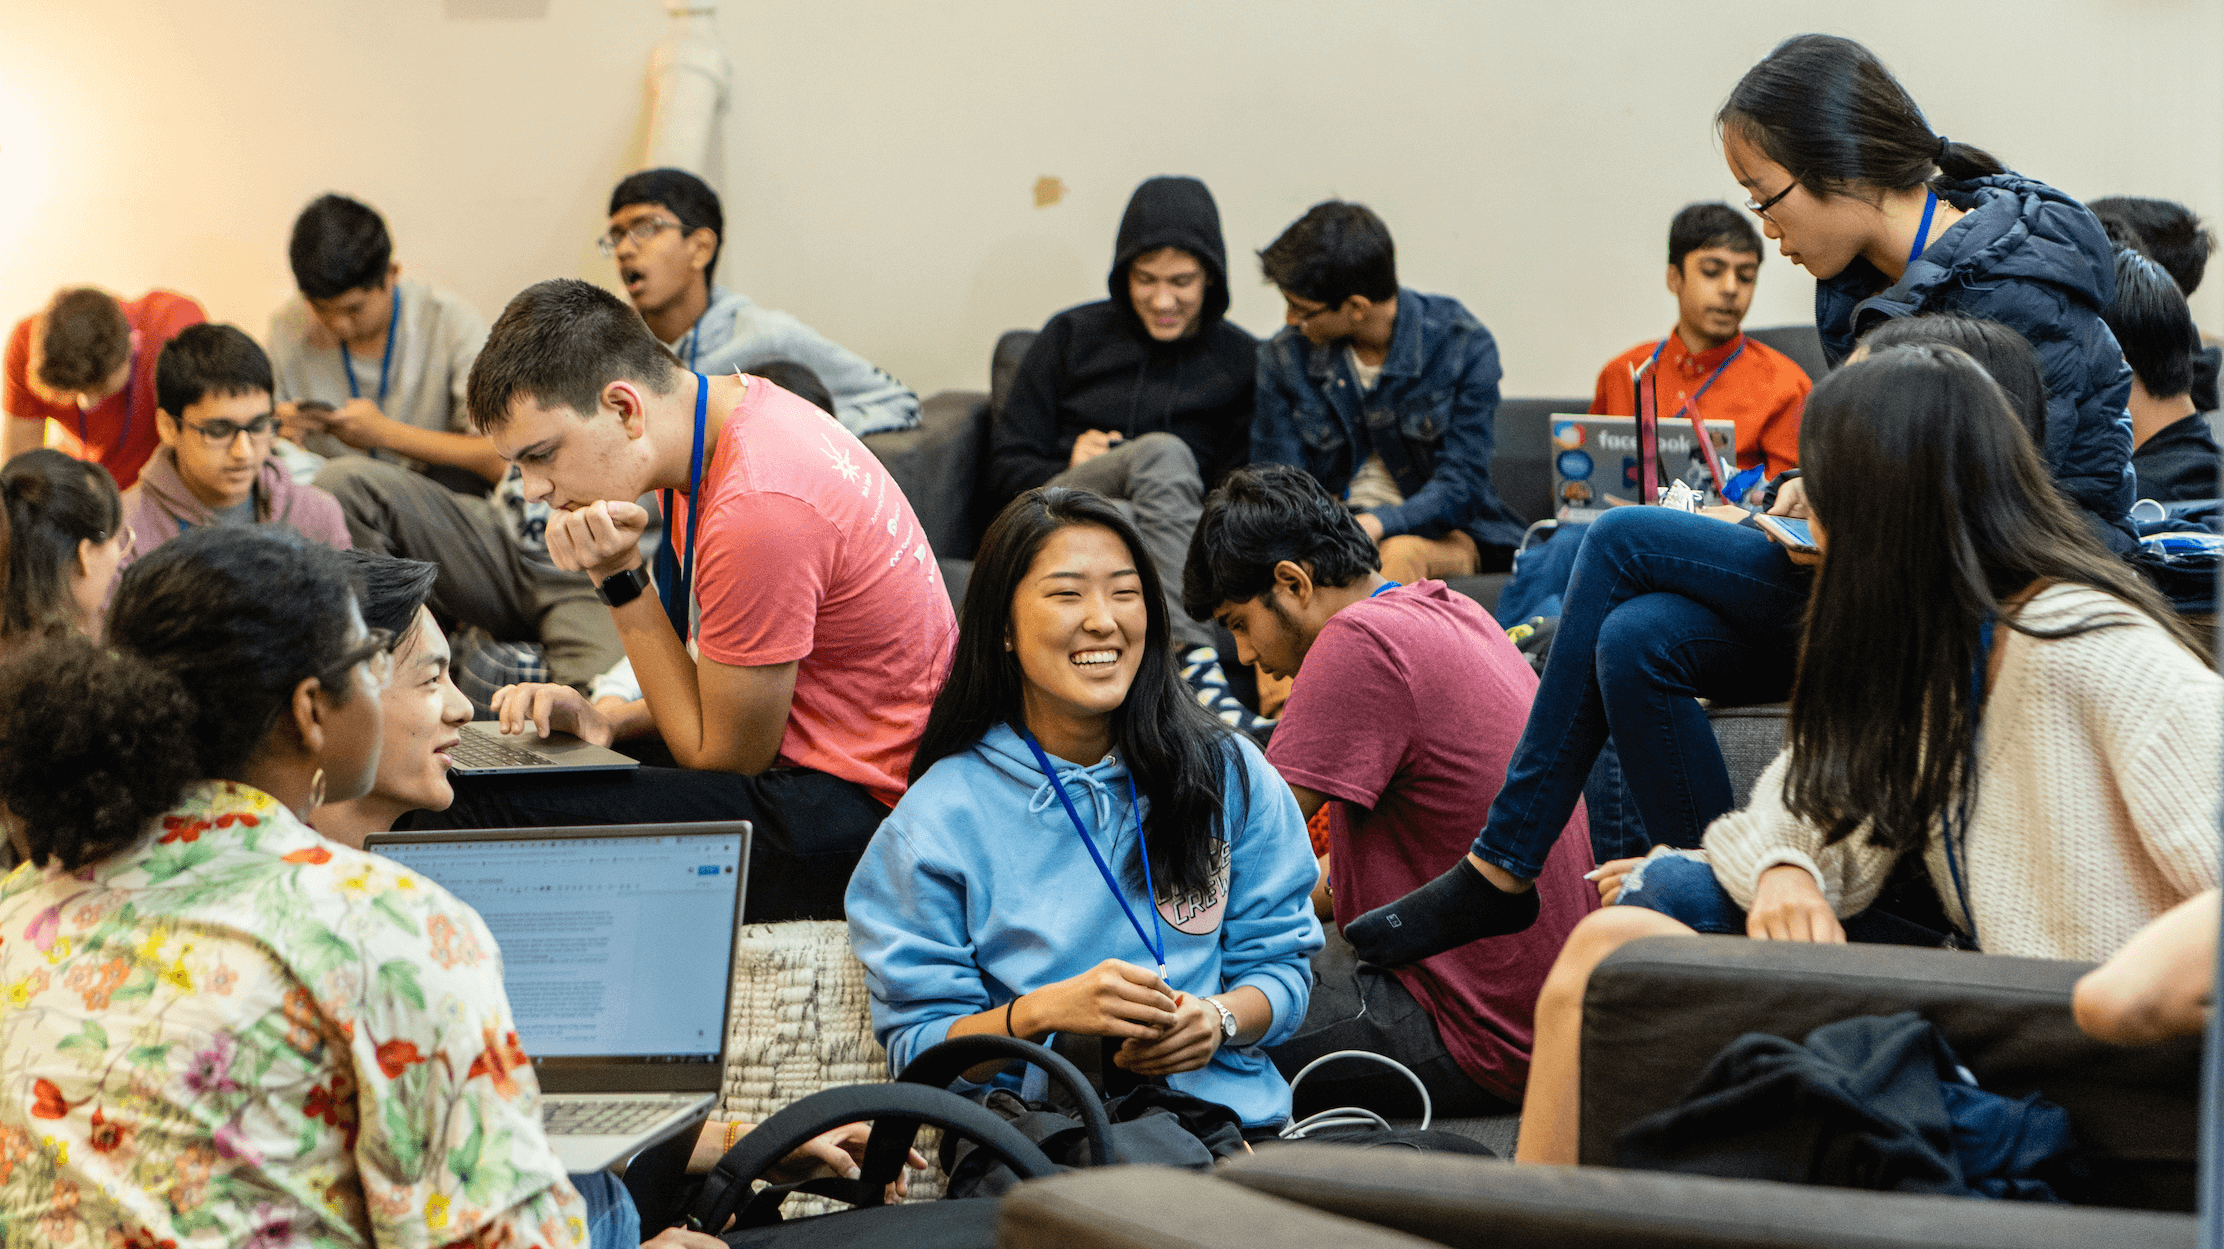 Hack Clubbers gather at the Flagship 2019 conference